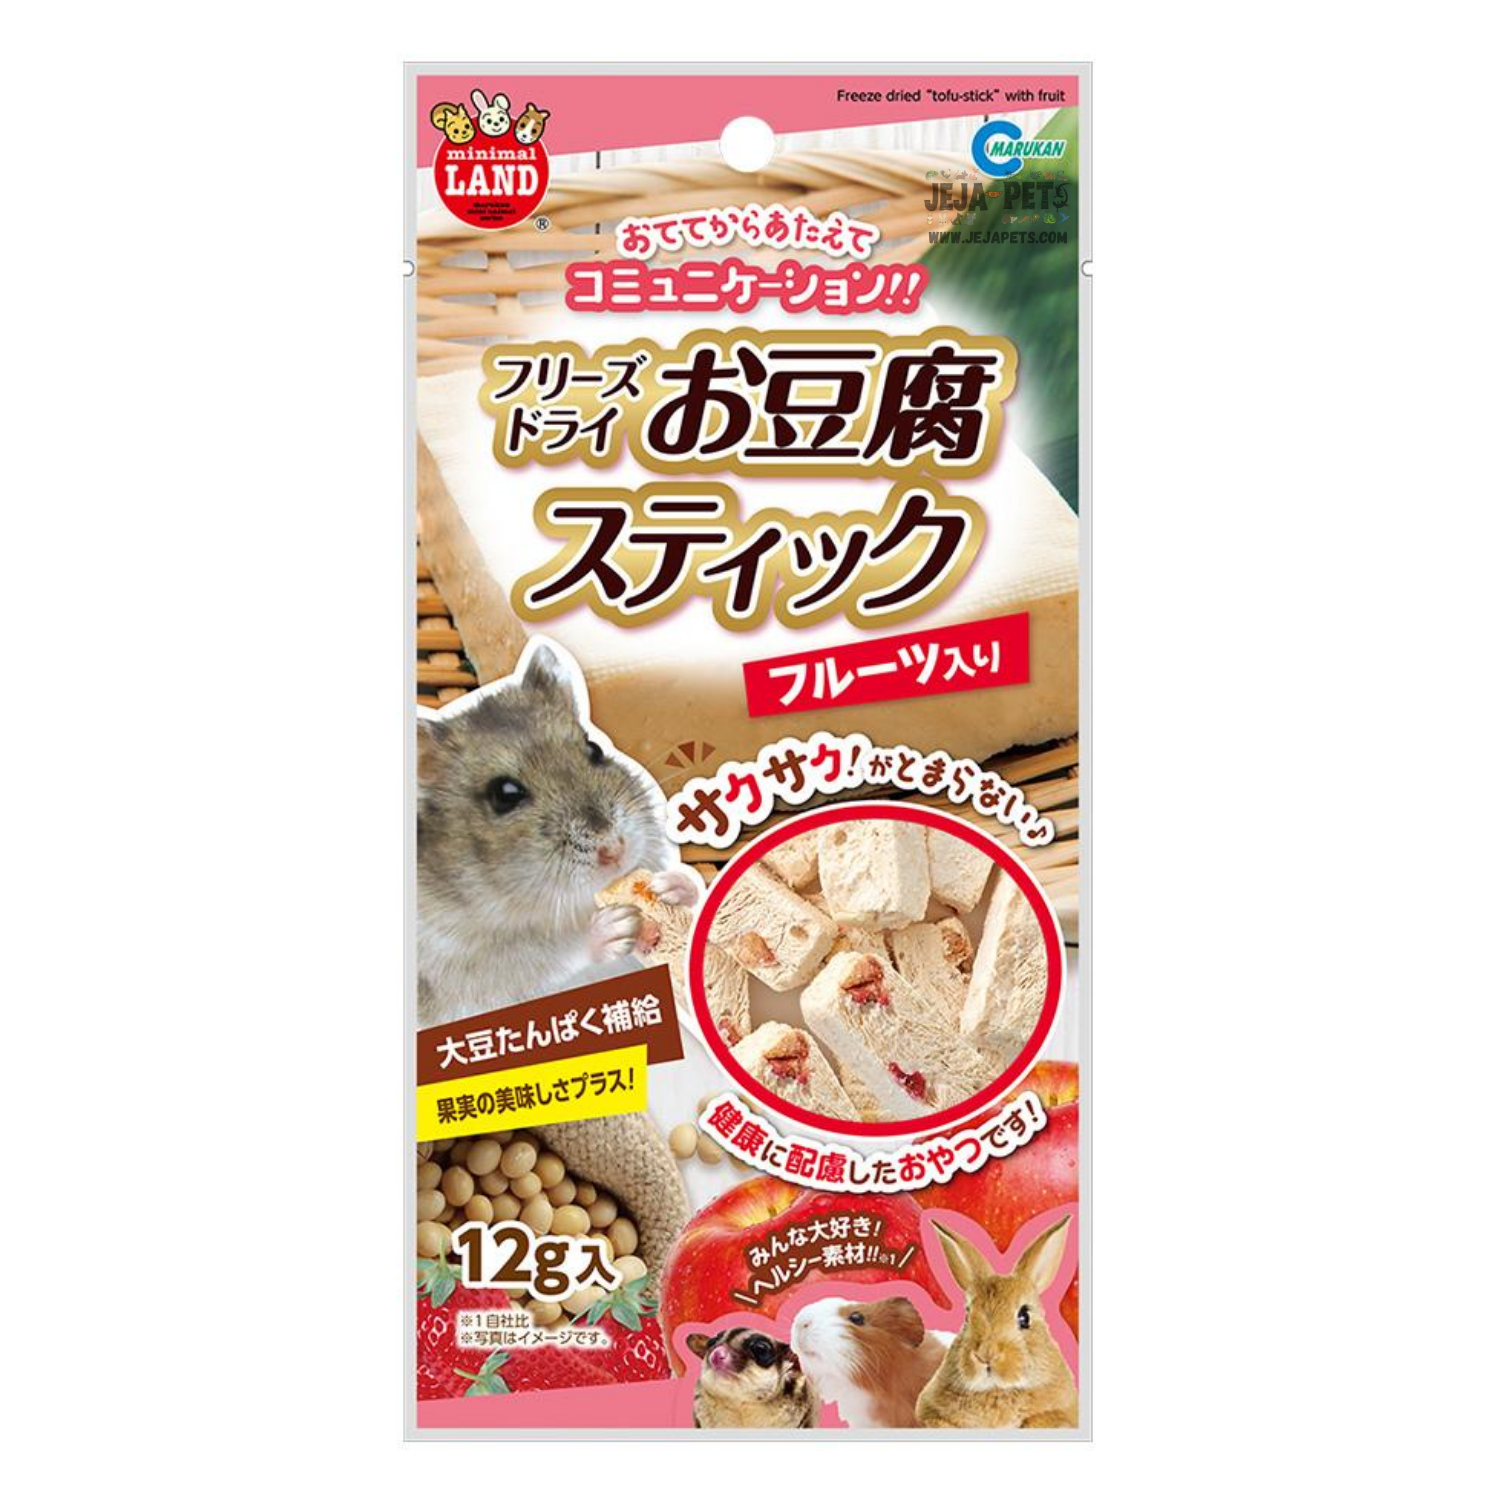 Marukan Freeze Dried Tofu Stick with Fruit for Small Animals - 12g